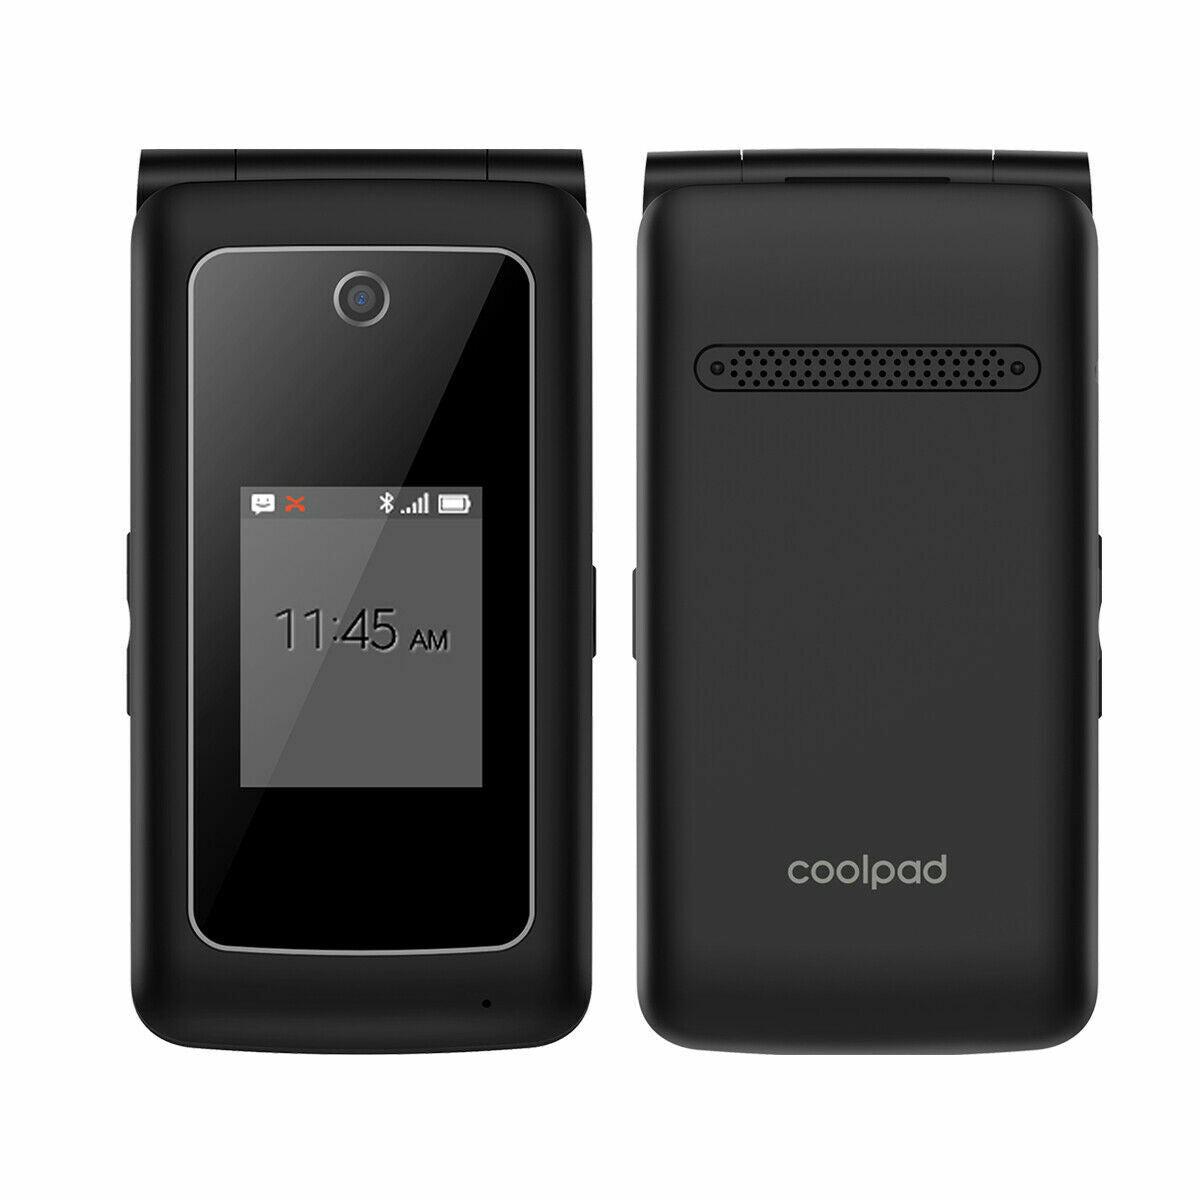 Coolpad Snap (Sprint Carrier Only)